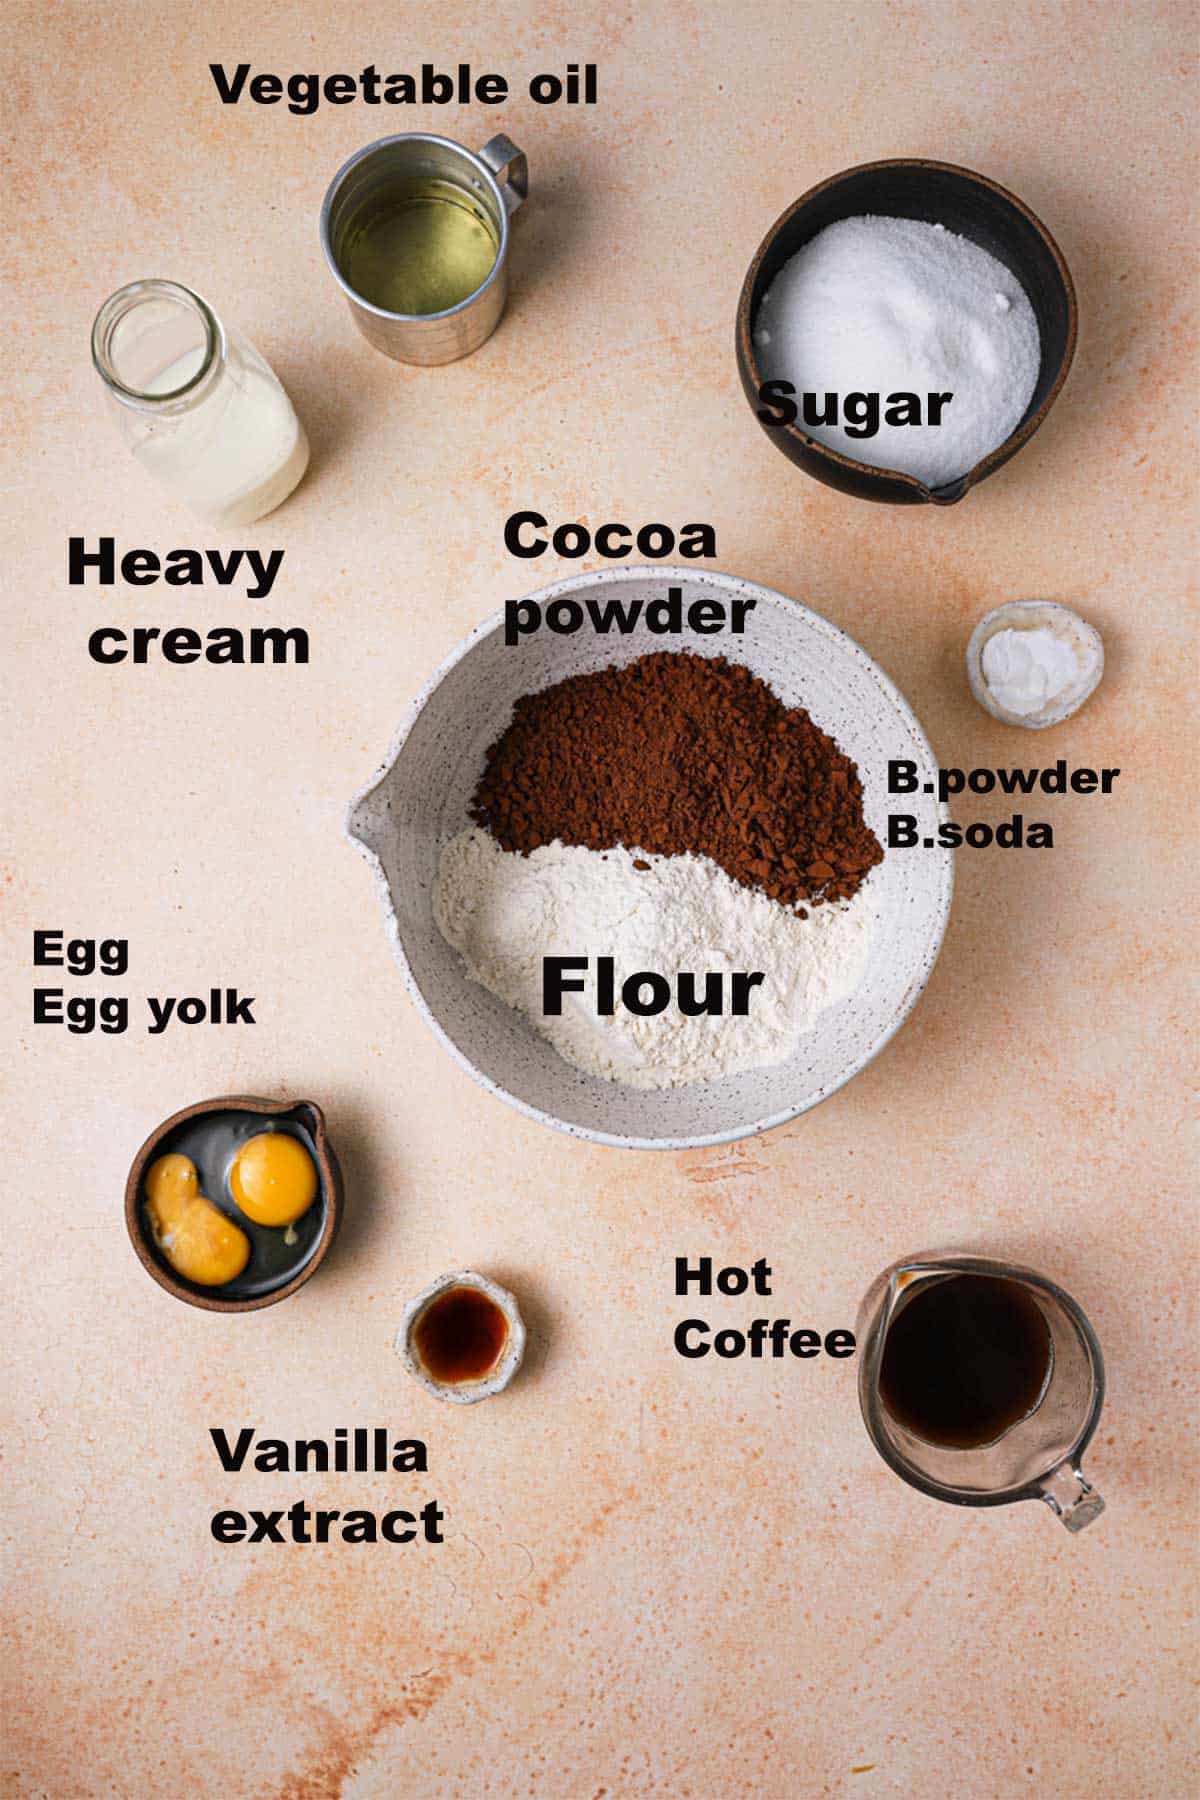 An ingredients list for moist chocolate cupcakes, flour, cocoa powder, vegetable oil, heavy cream, egg, egg yolk, hot coffee, vanilla extract, baking powder and baking soda.